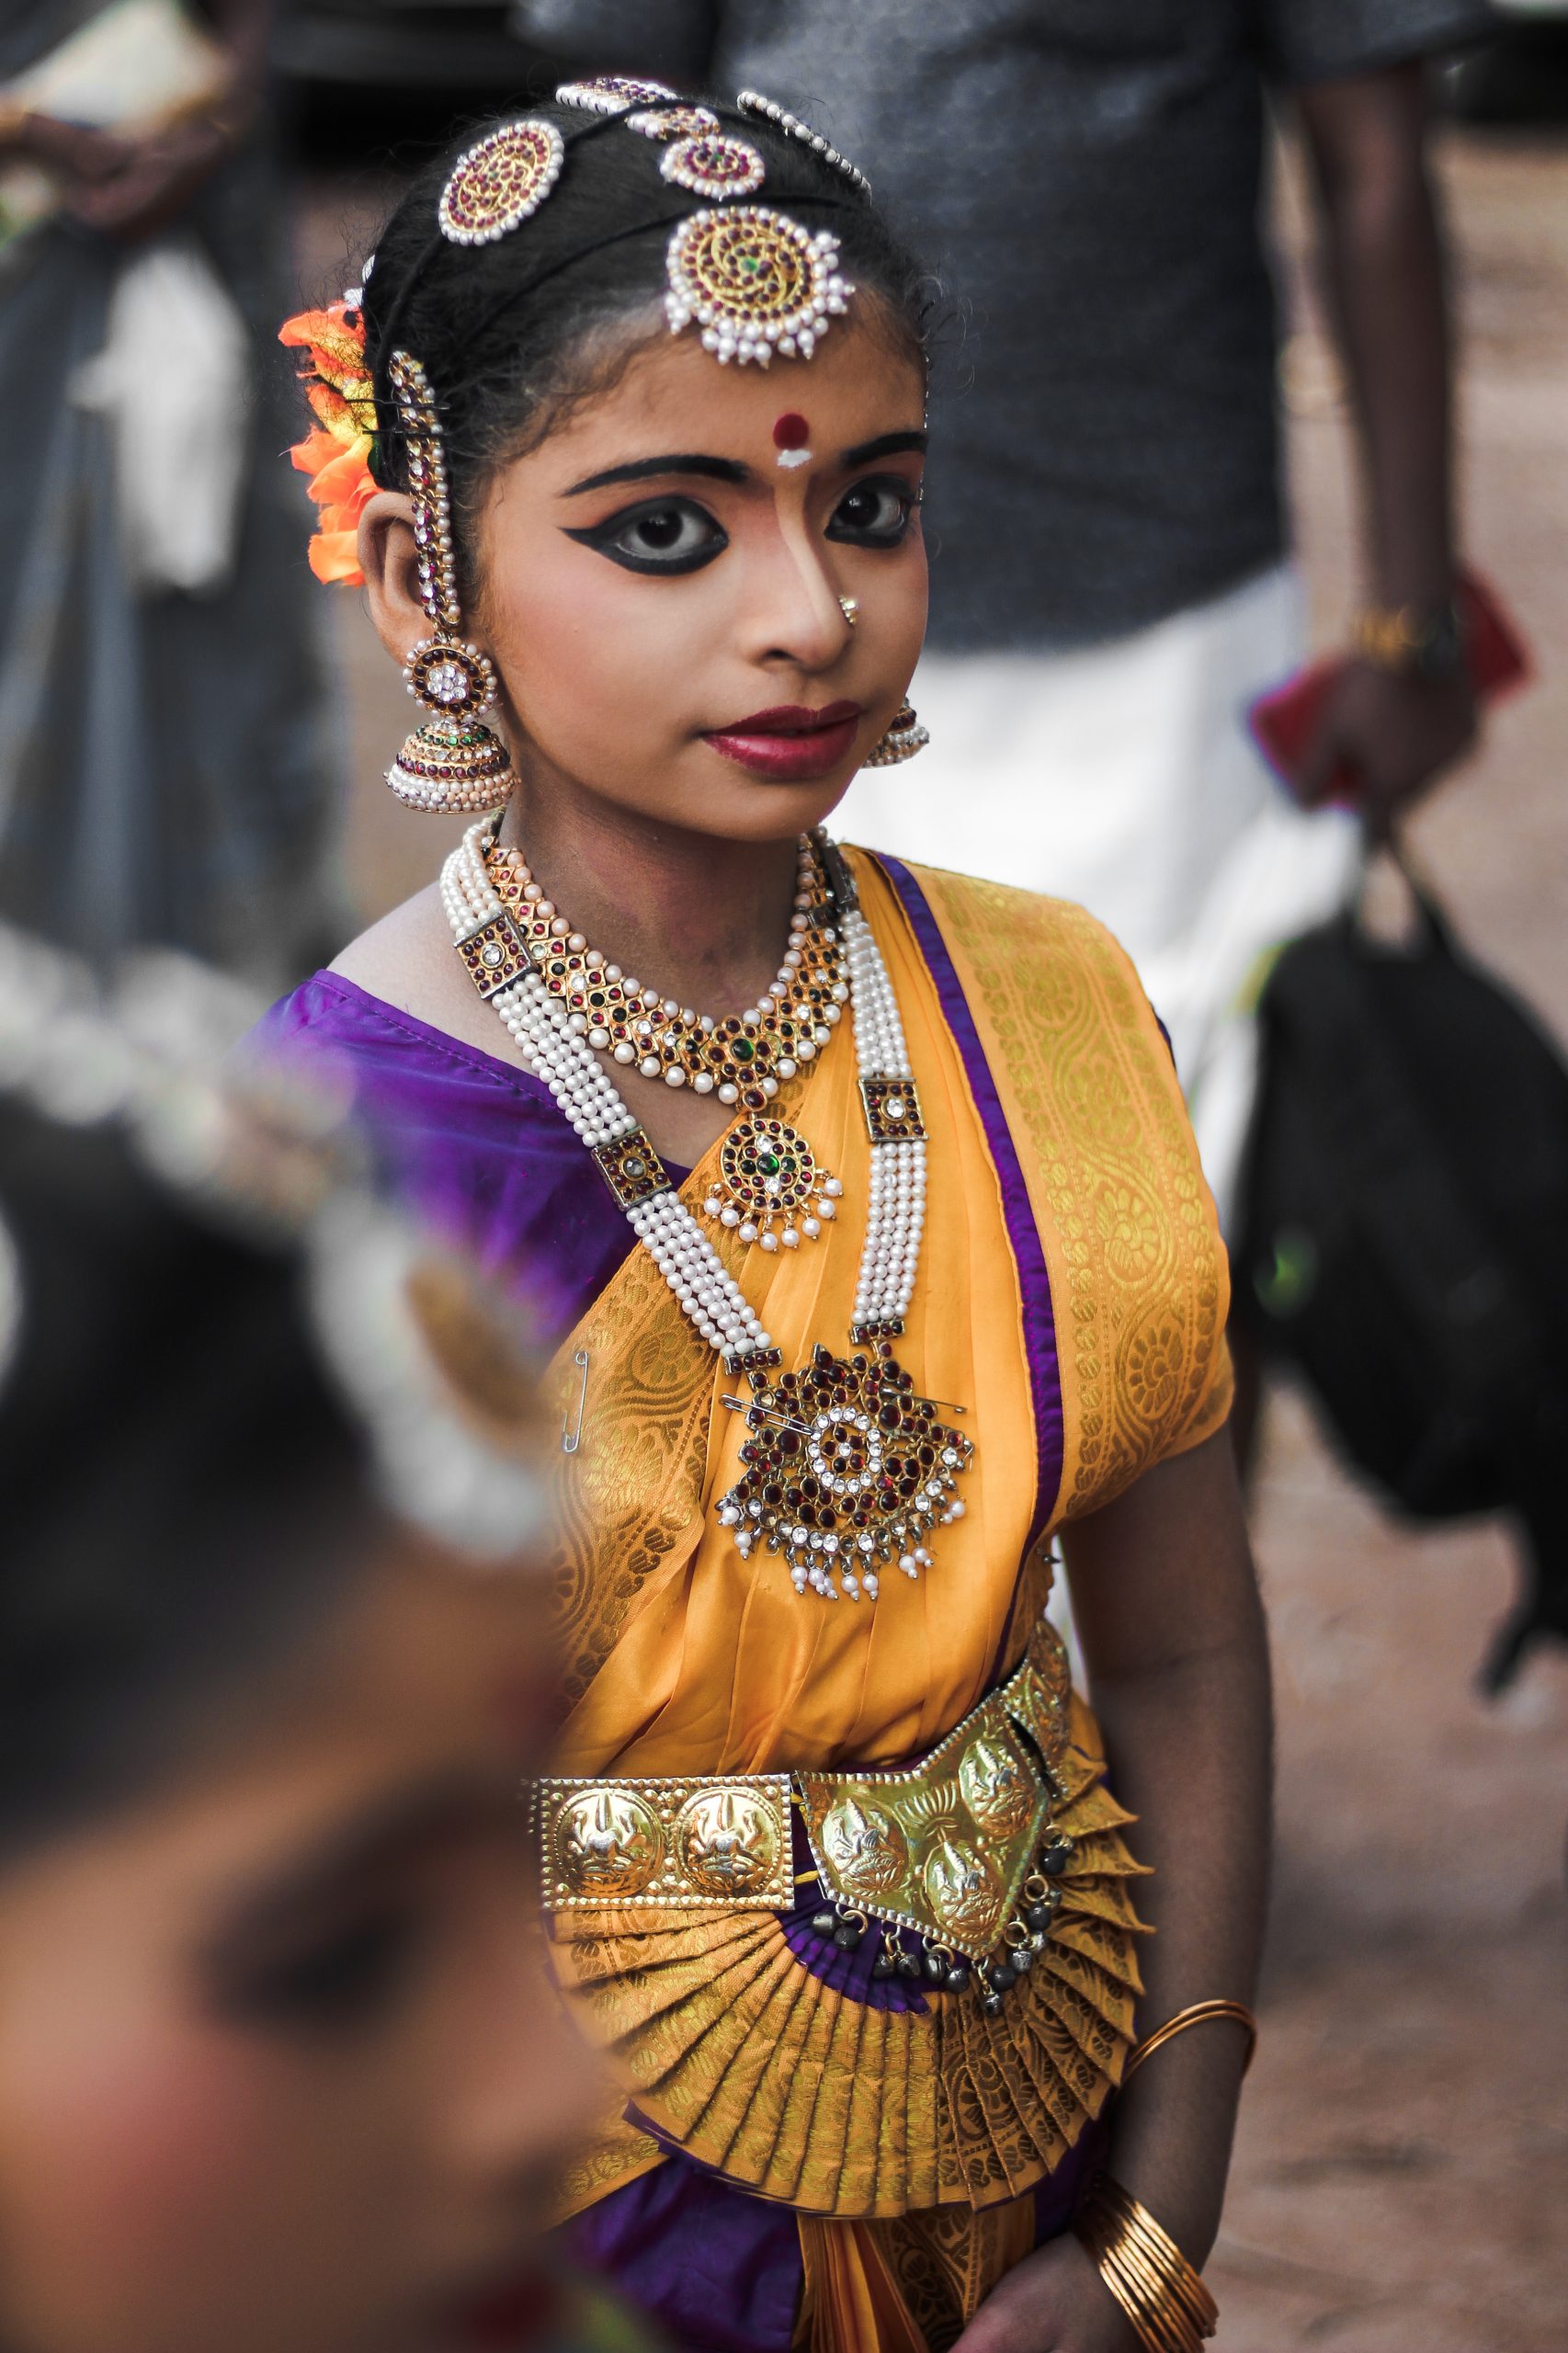 A little girl ready for classical dance